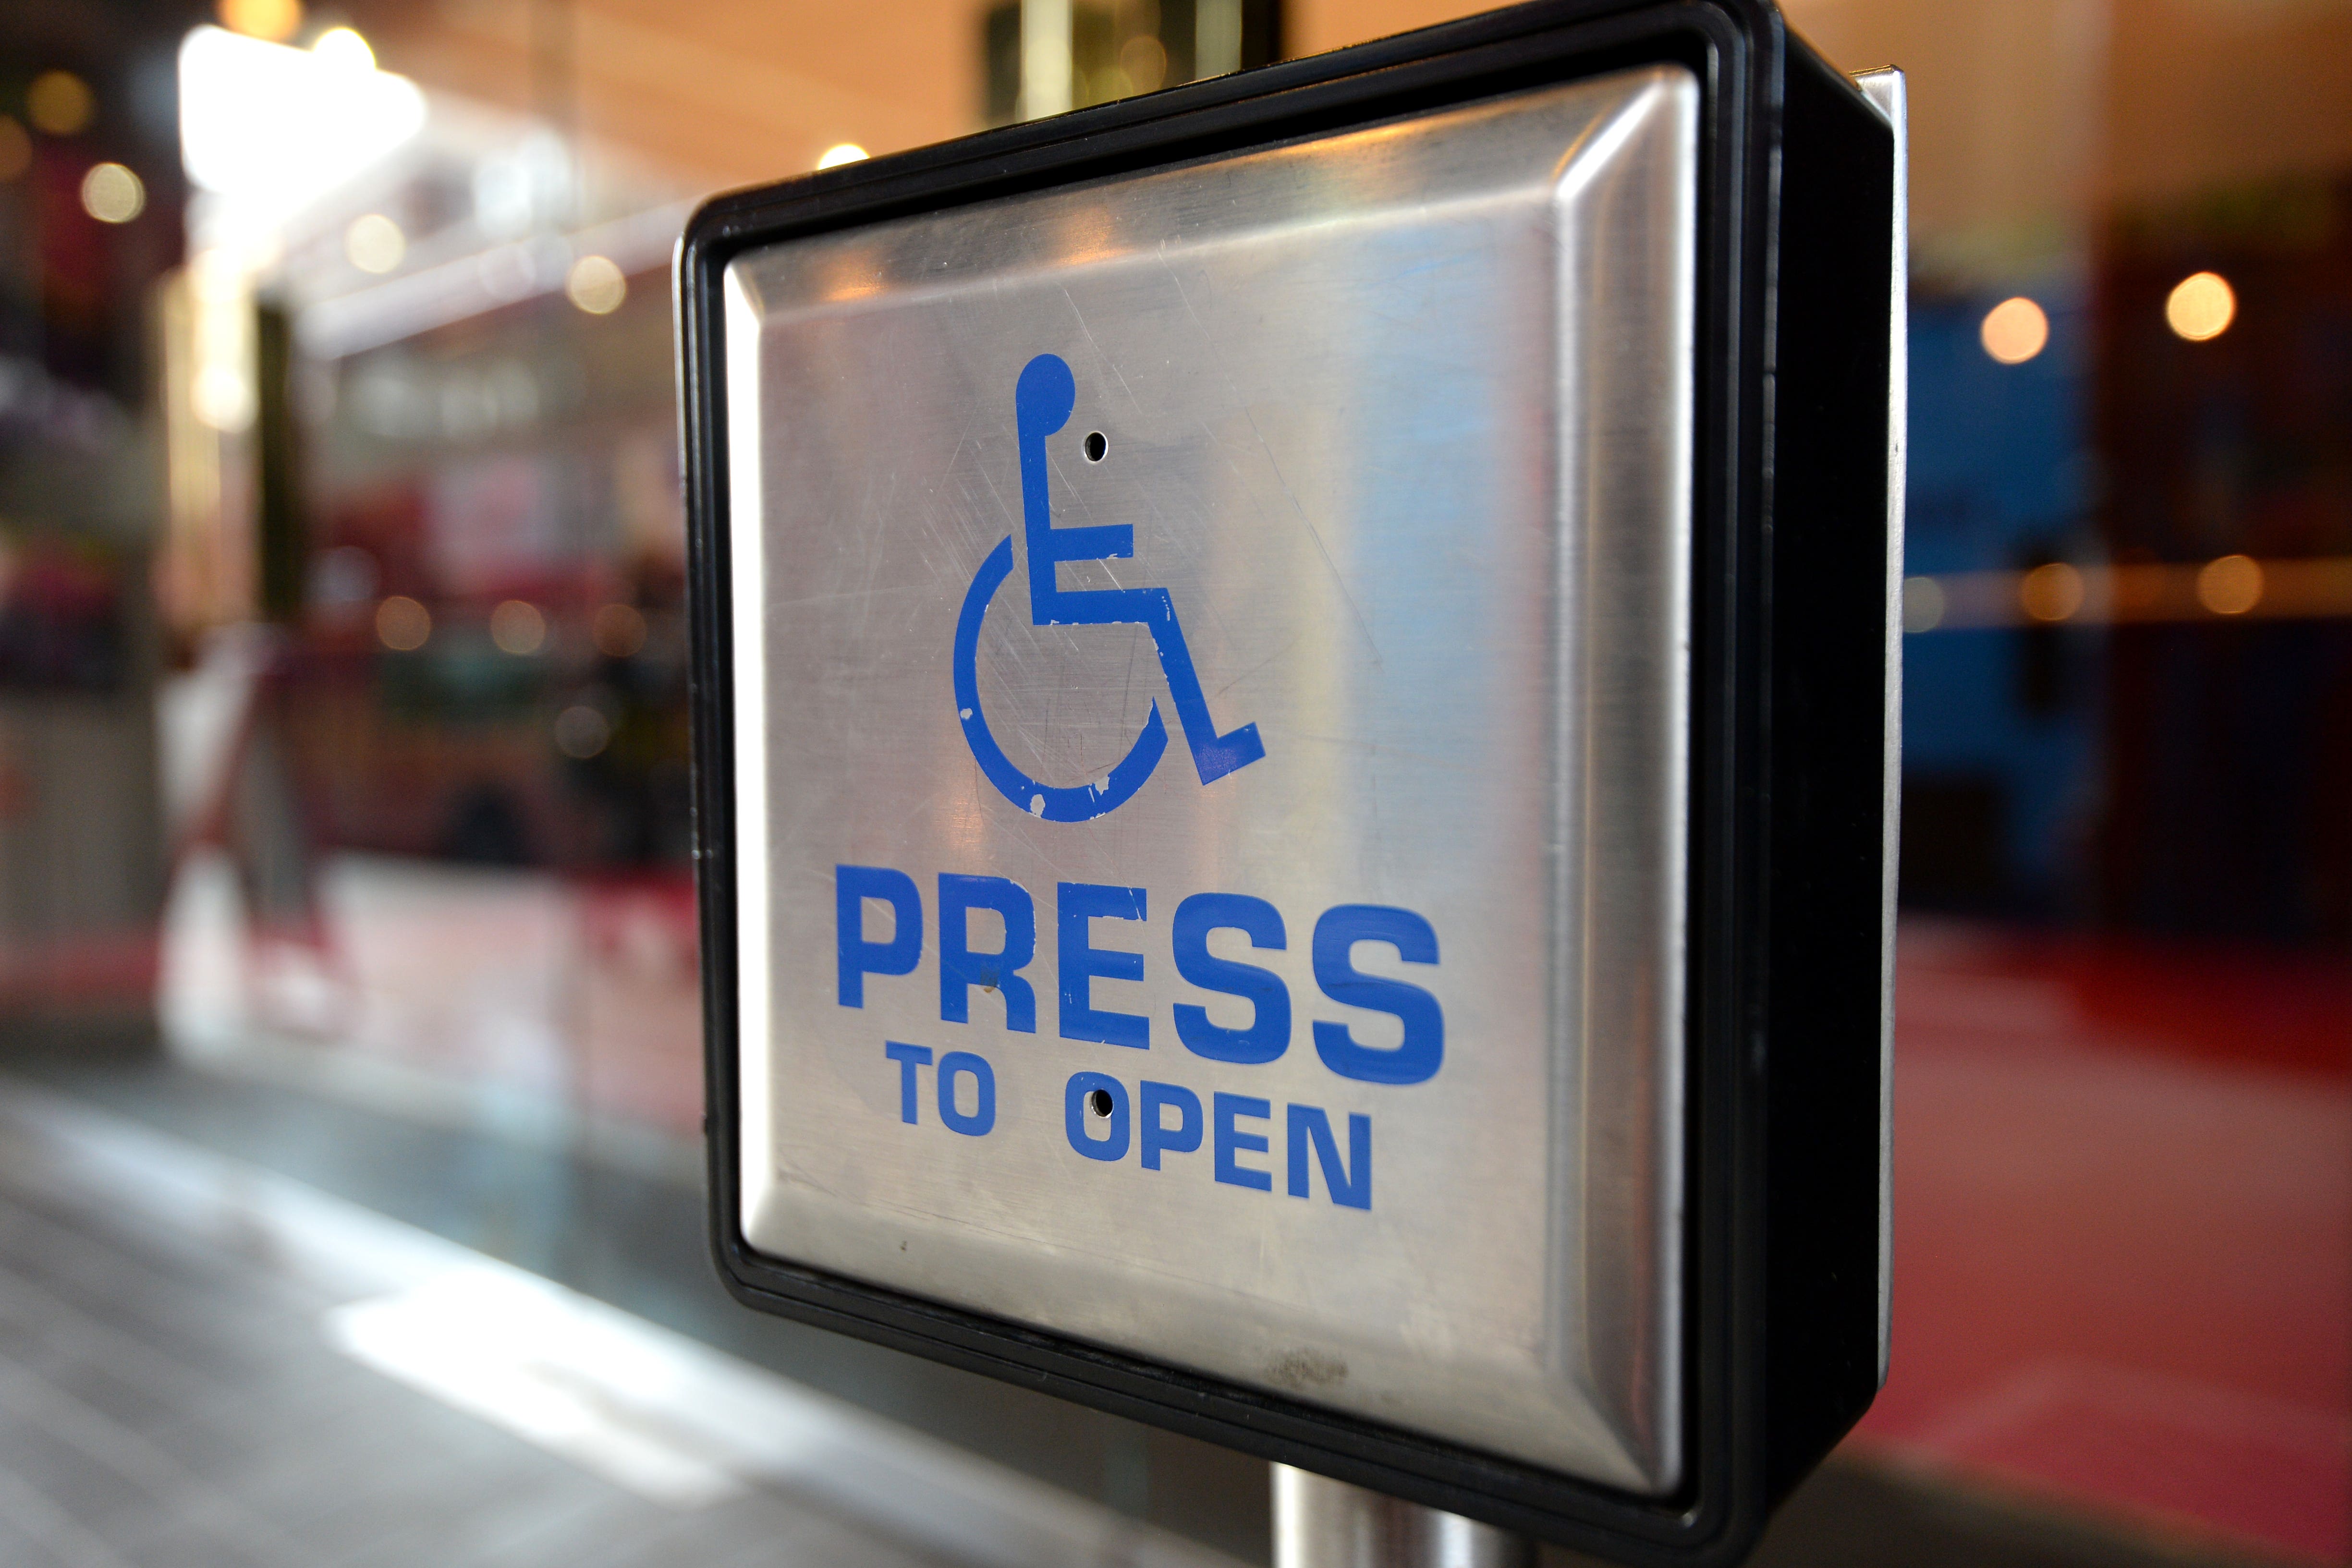 Almost one in five disabled professionals said they had been treated unfairly at work